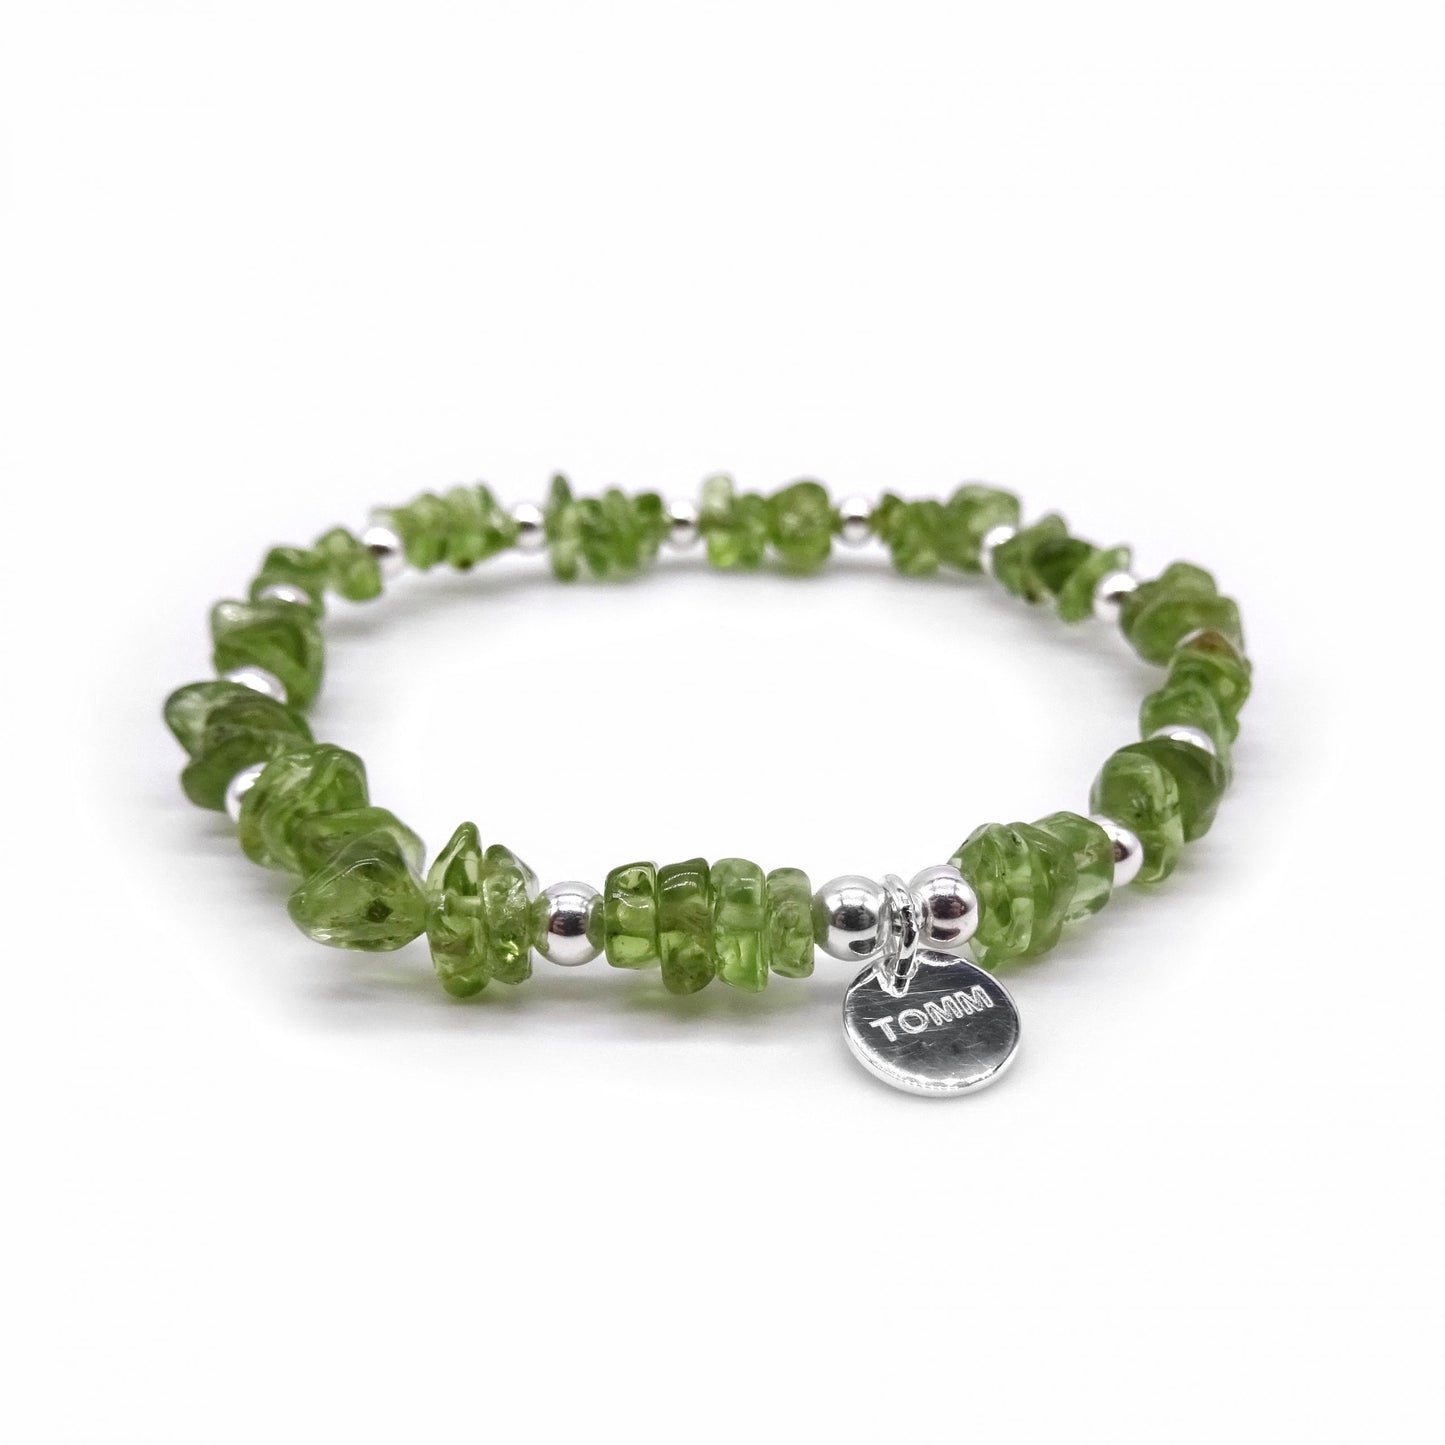 Peridot and Herkimer Diamond Mini Crystal Bracelet by Healing Stones for You